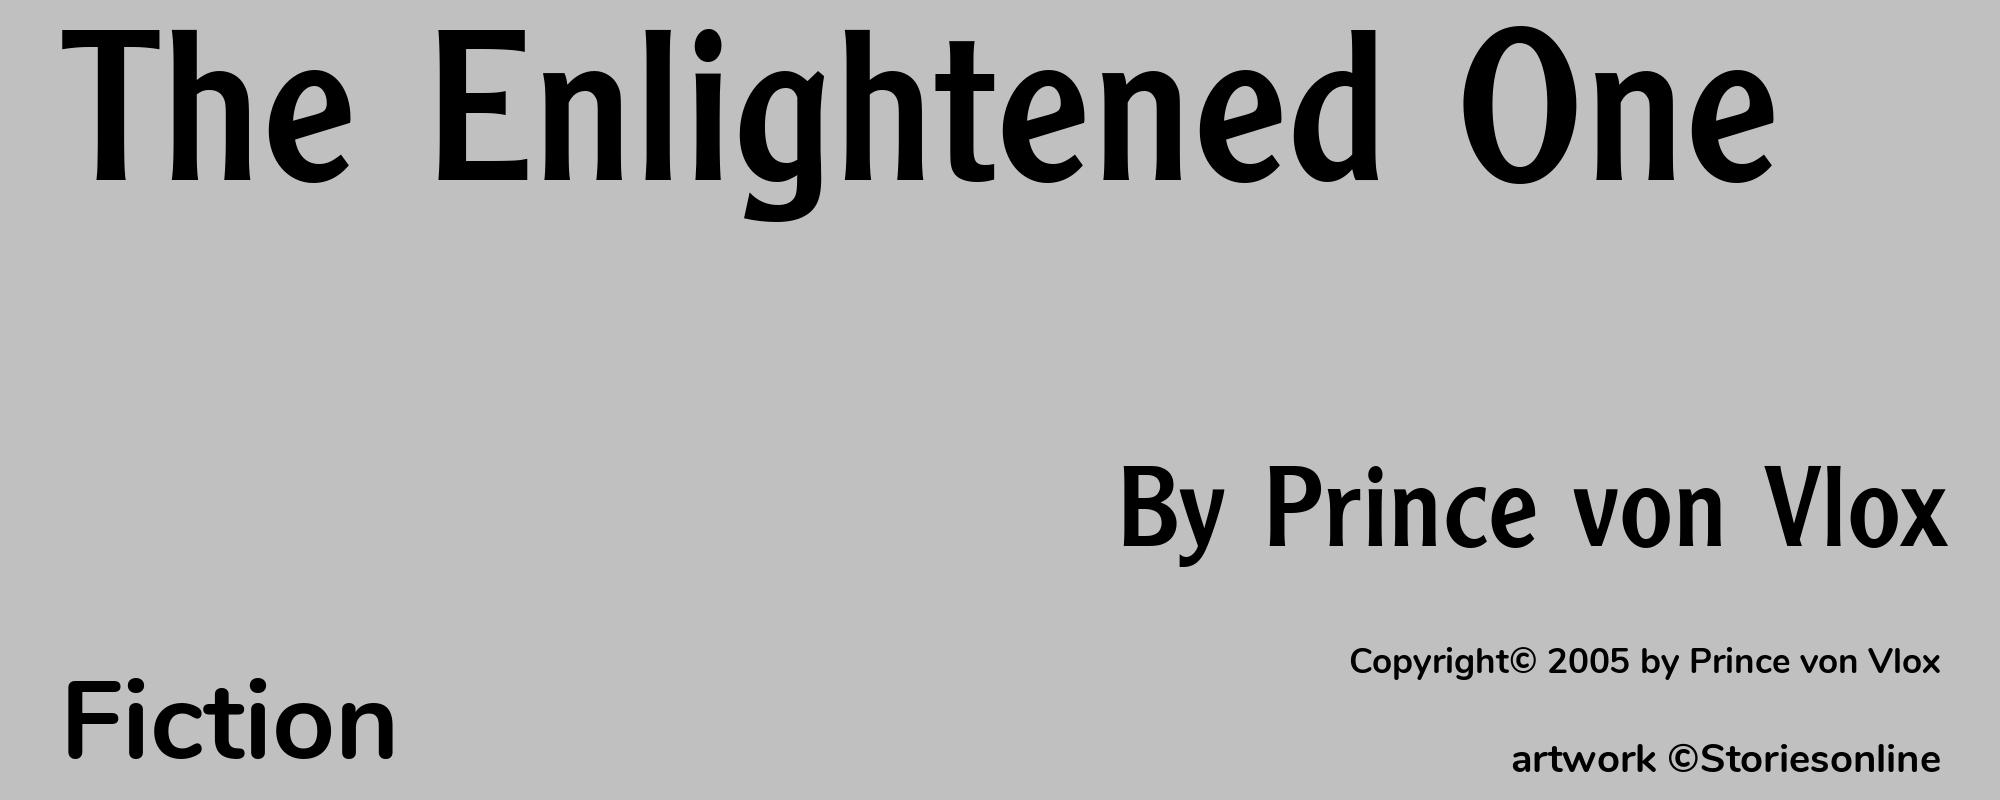 The Enlightened One - Cover